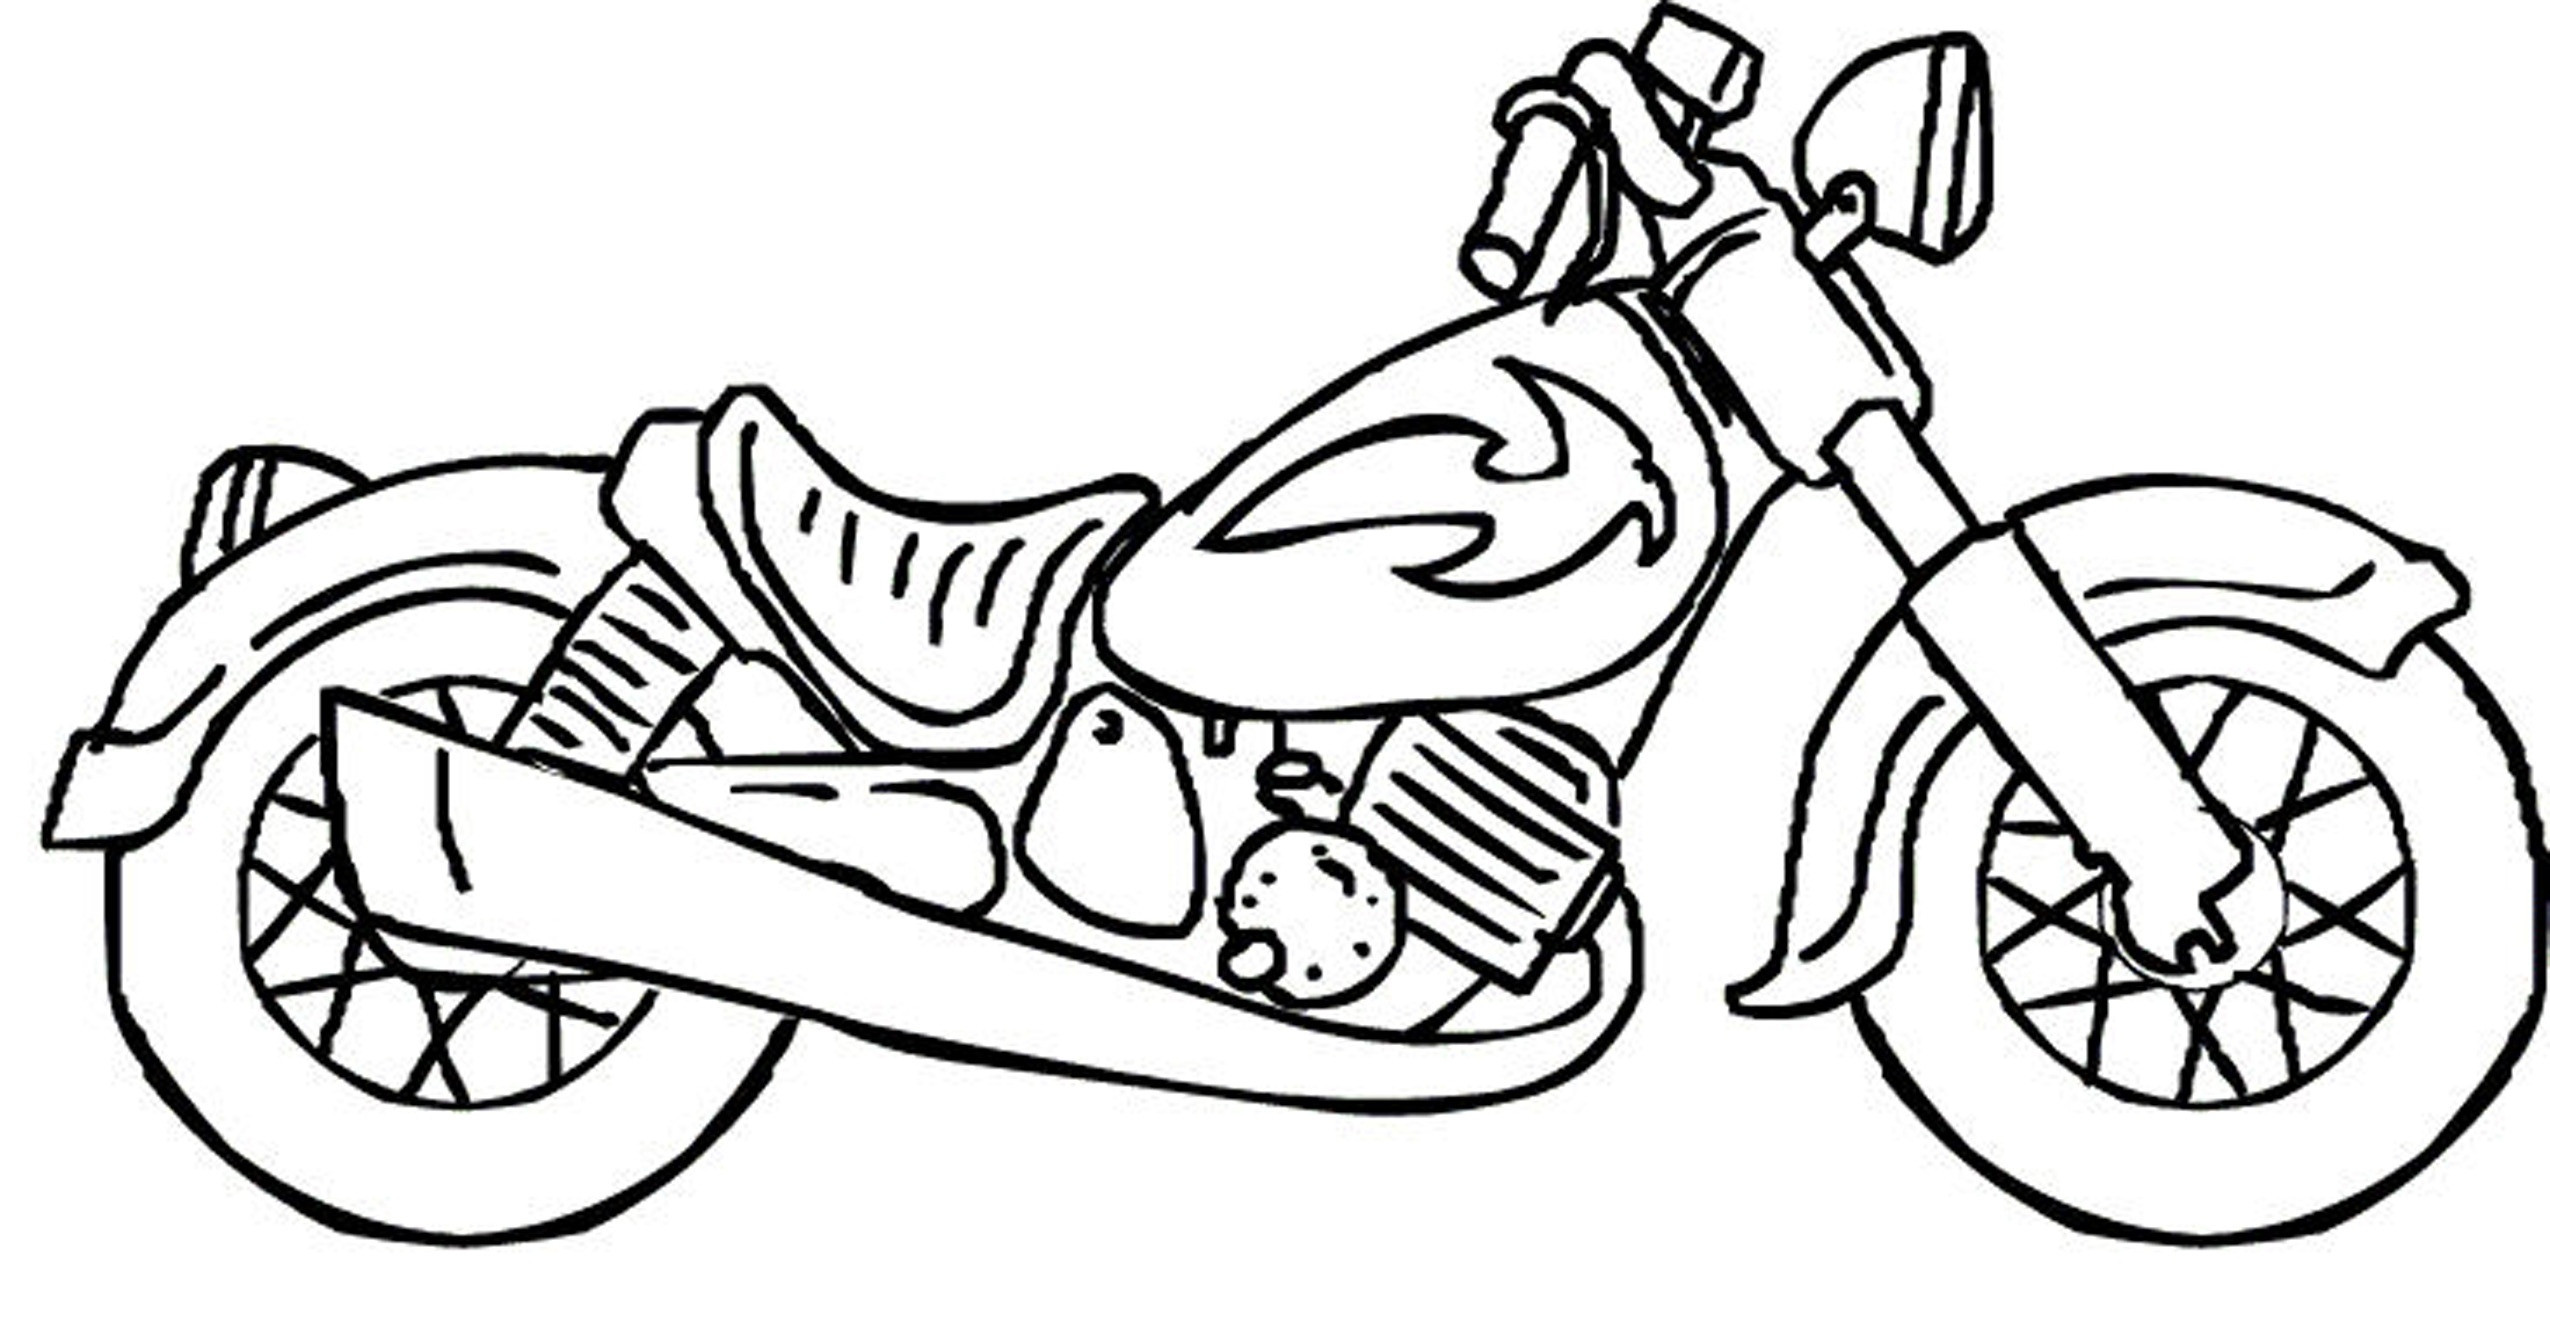 Coloring Sheets For Boys Printable
 Printable Coloring Pages For Boys